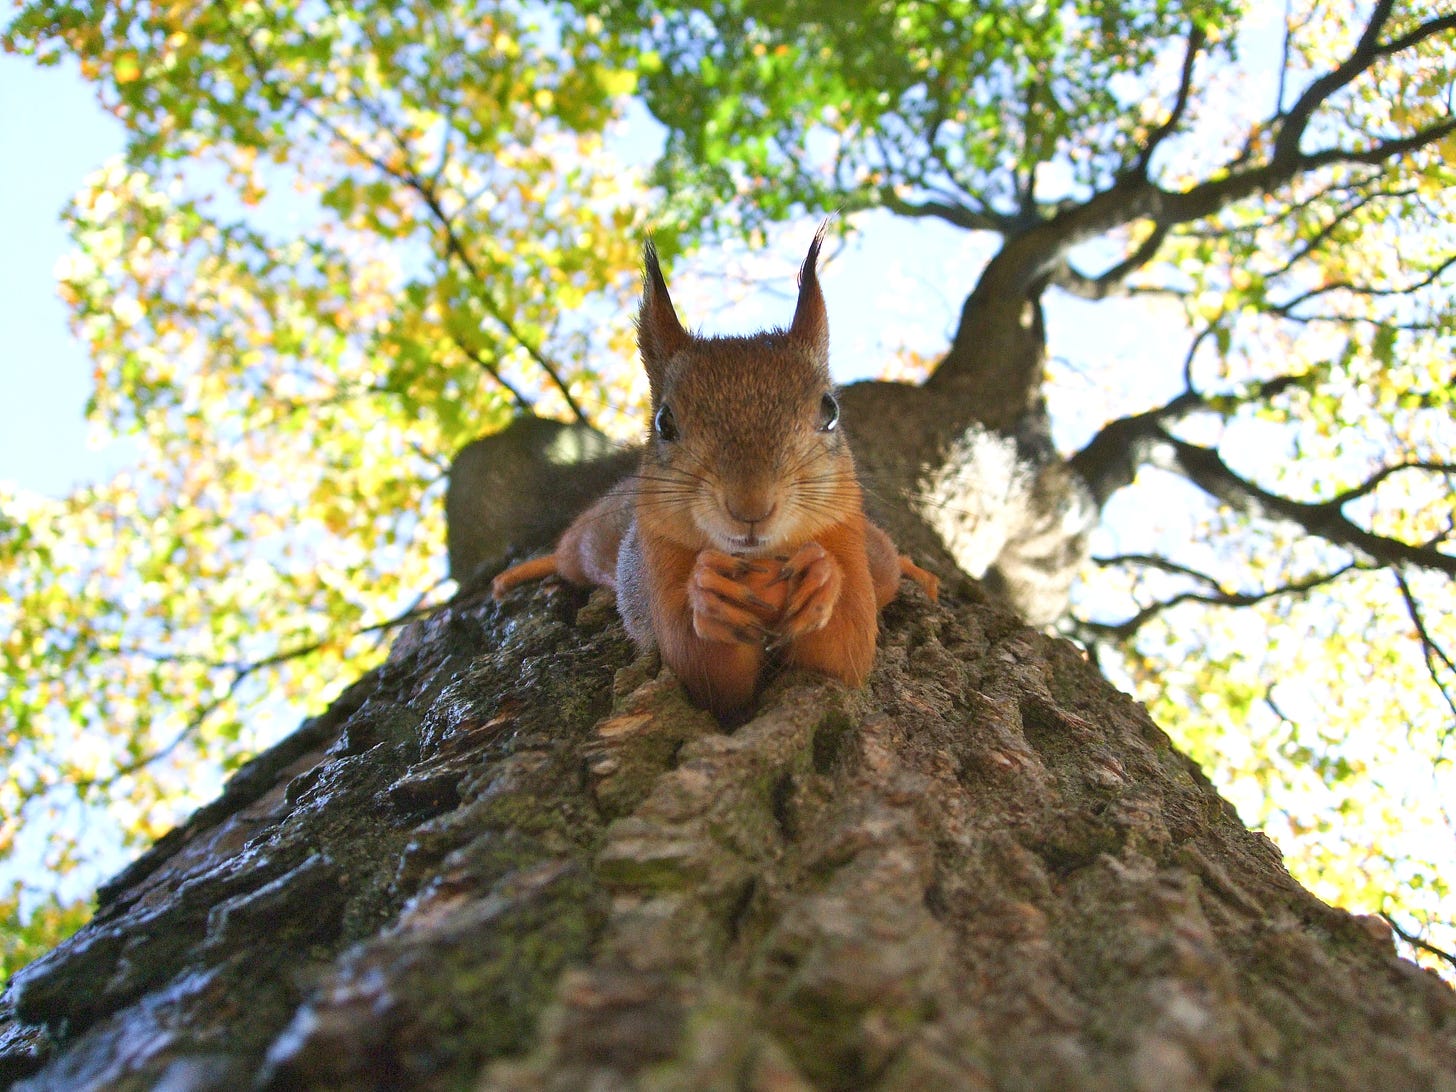 A squirrel with tufted ears holding a nut while hanging toward the ground, image captured from the ground perspective